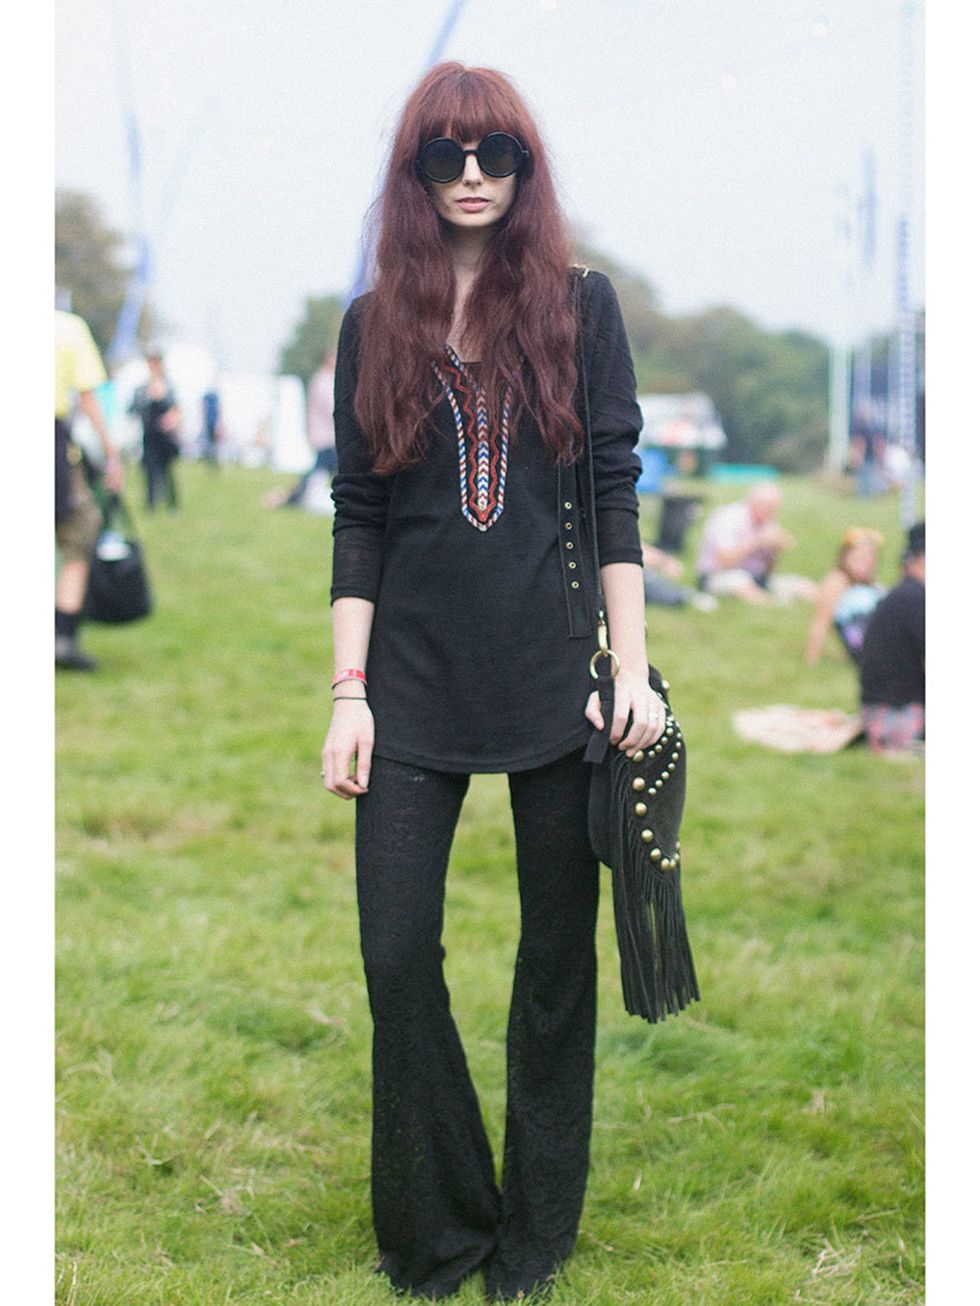 Emily Wood wears Vintage top and shoes, H&M trousers and Topshop bag.